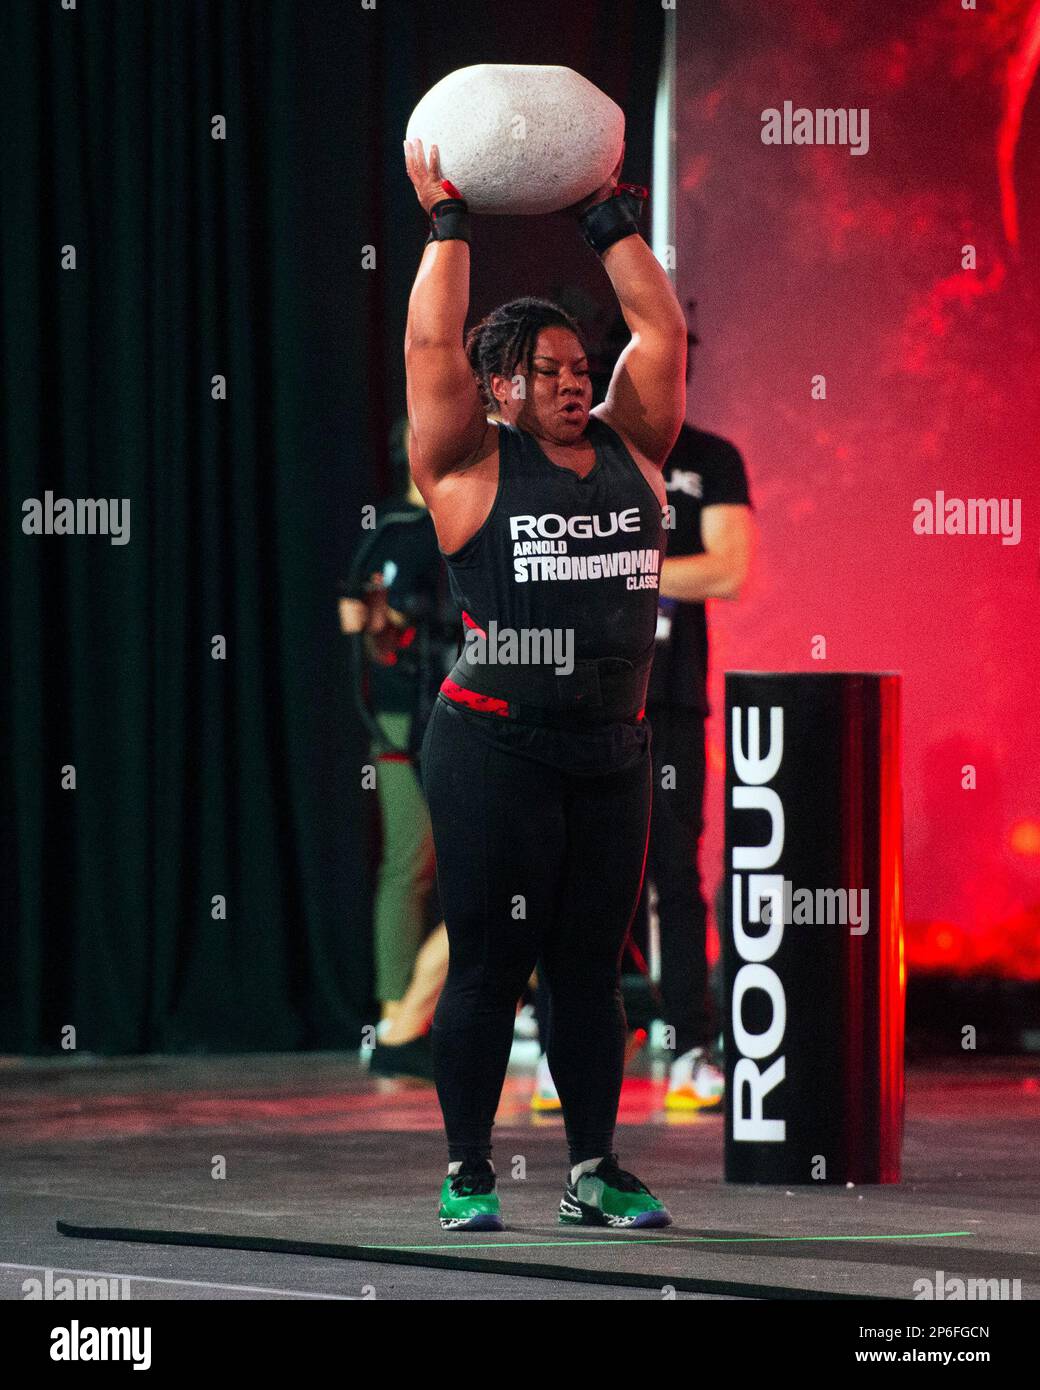 Columbus, Ohio, United States. 4th Mar, 2023. Andrea Thompson (GBR) competes in the Unspunnen Stone Throw at the Arnold Strongwoman Classic in Columbus, Ohio. Credit: Brent Clark/Alamy Live News Stock Photo